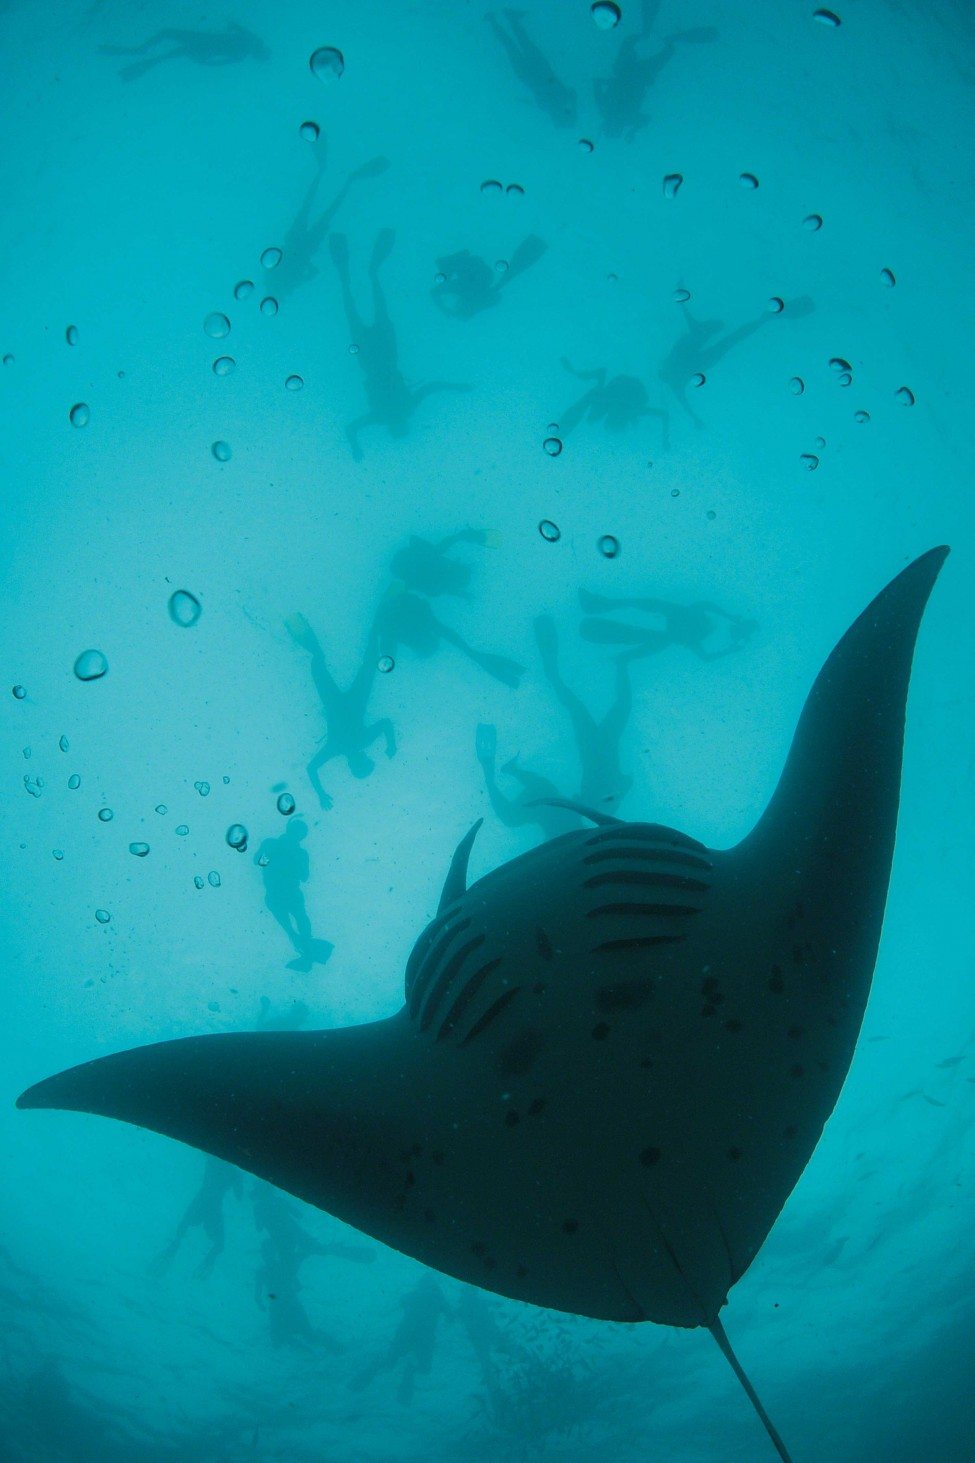 A reef manta ray (Manta alfredi) swims in tight backward summersaults, looping over and over again as it feeds on a dense patch of planktonic prey, while snorkellers above watch the performance.<br />
Photo by Thomas Peschak